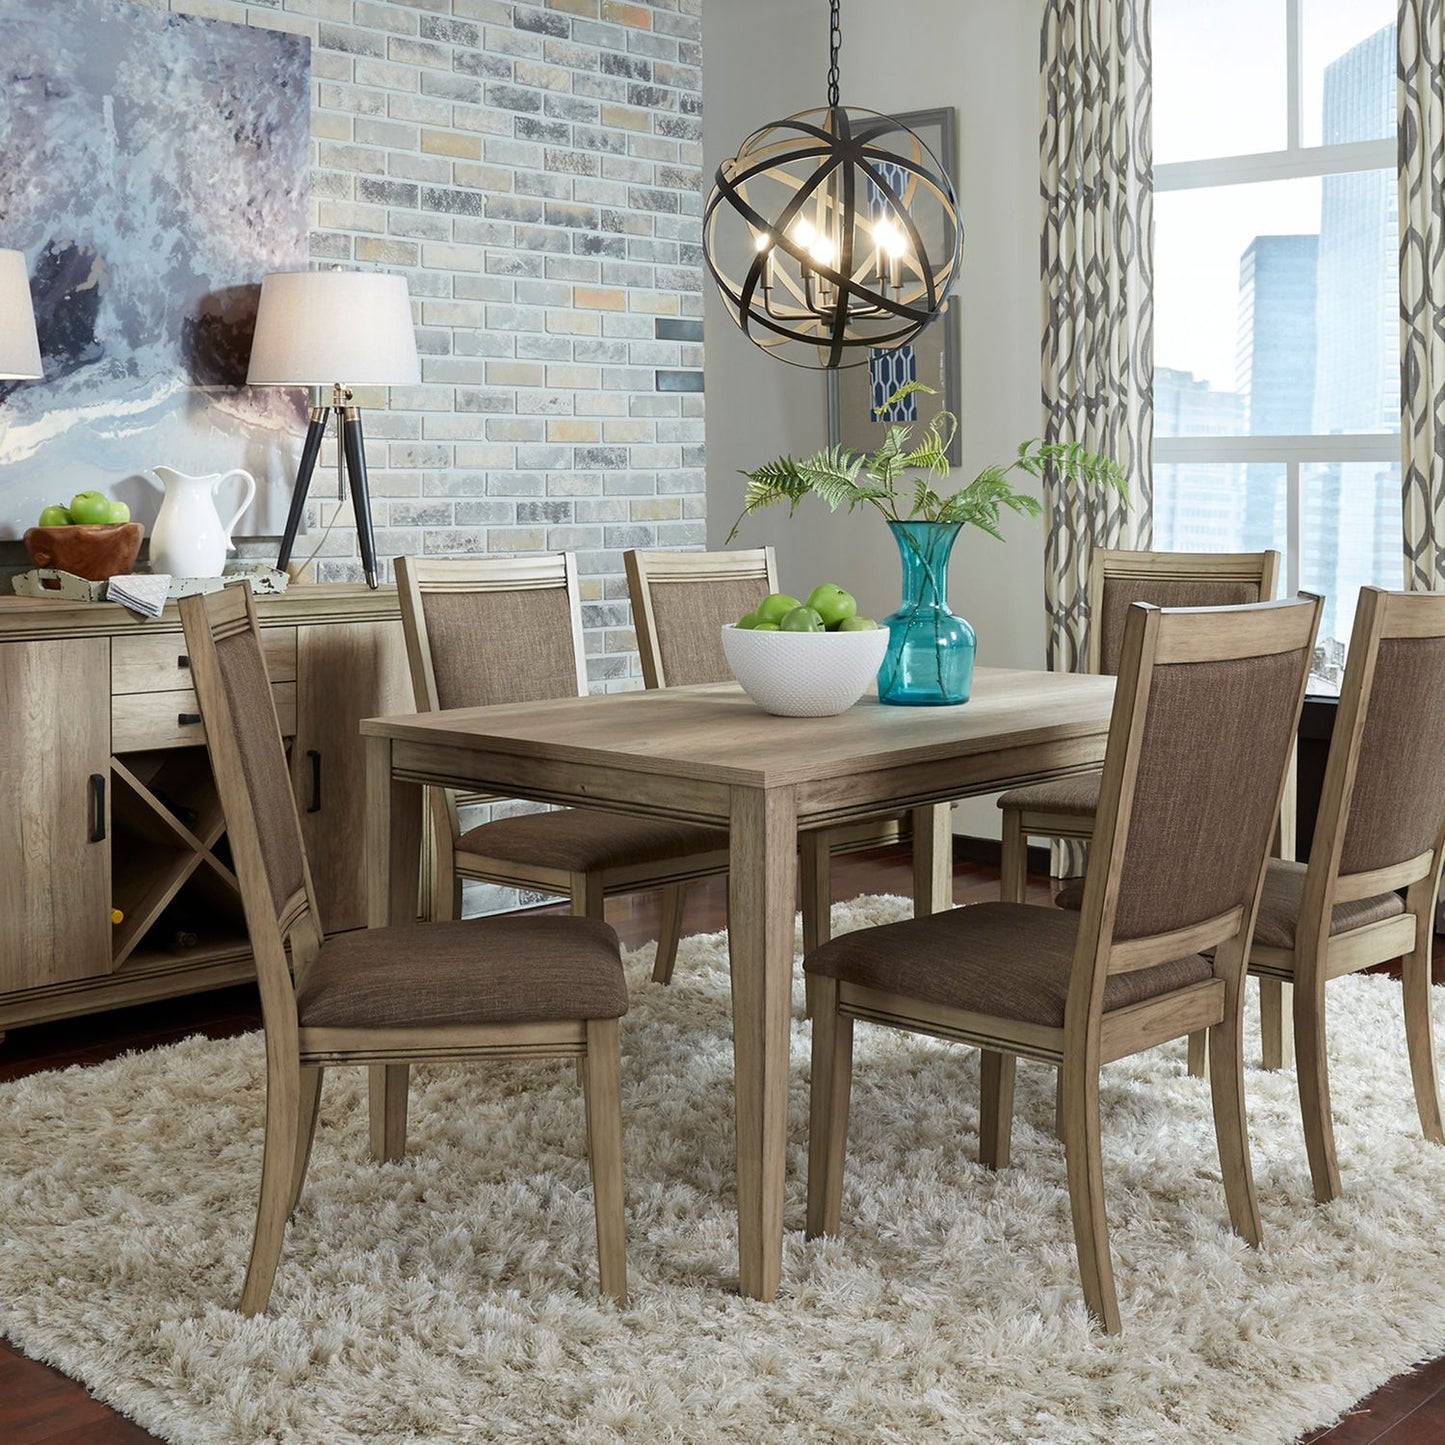 Sun Valley Upholstered Dining Chair Limited Availability